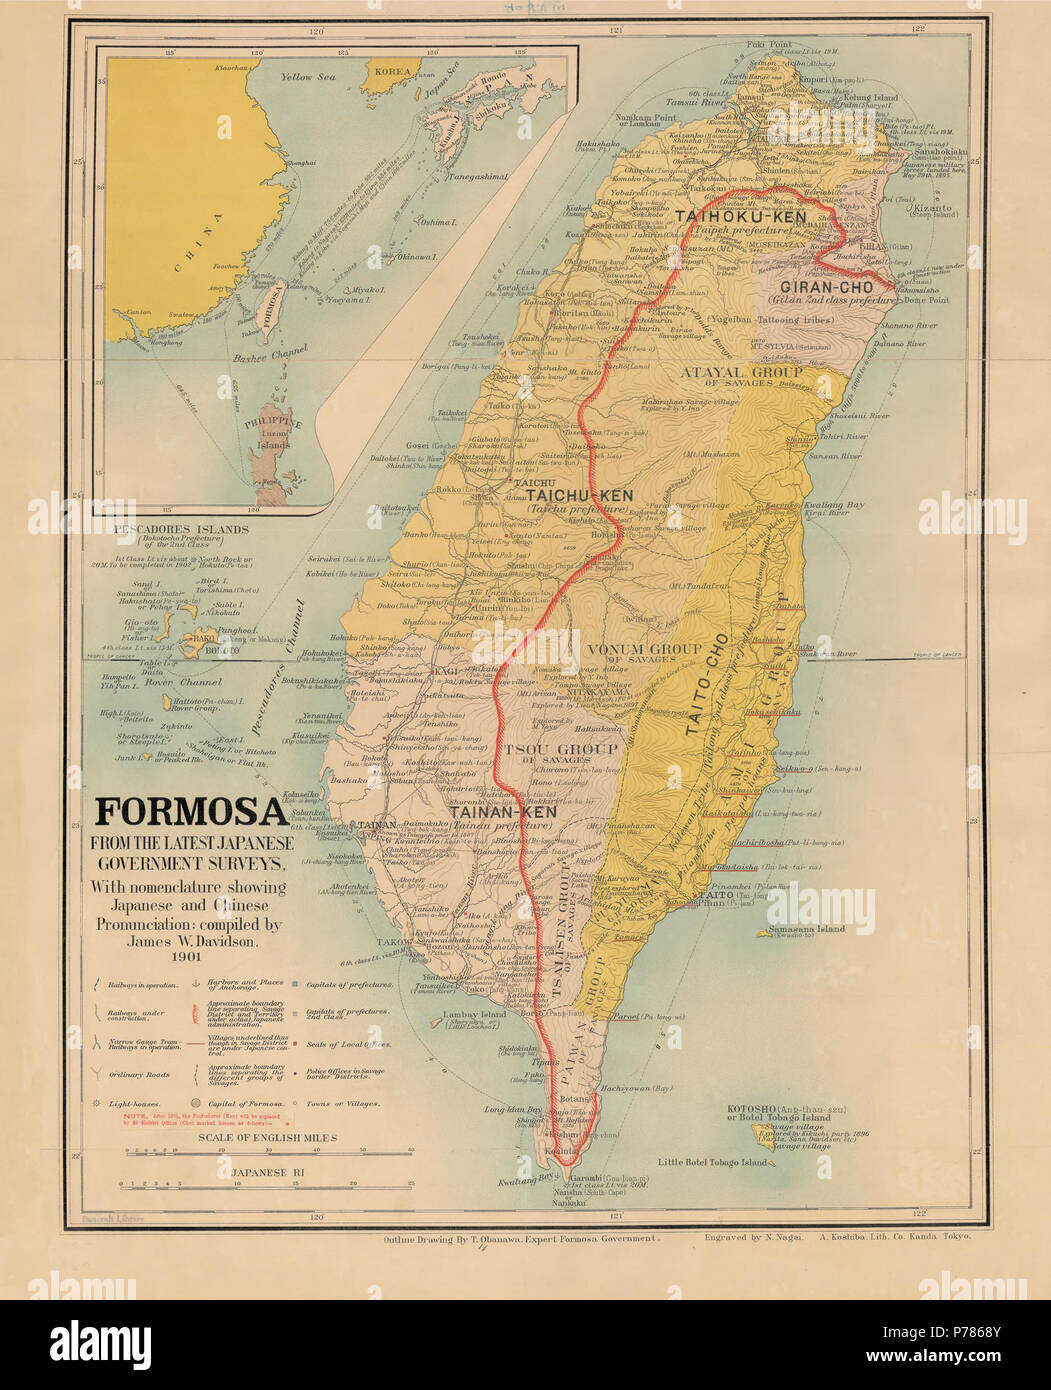 English: 'Formosa from the latest Japanese government surveys.' 1901. Map. Insert to Davidson, James W. (1903) The Island of Formosa, Past and Present : history, people, resources, and commercial prospects : tea, camphor, sugar, gold, coal, sulphur, economical plants, and other productions, London and New York: Macmillan. Note on nomenclature and pronunciation (p. iii): 'The Japanese name is given first, and the Chinese in brackets, with the exception of a few well-known names such as Kelung, Takow, etc., and some English names of islands in the Pescadores.' . 1901 20 Davidson (1901) - General Stock Photo